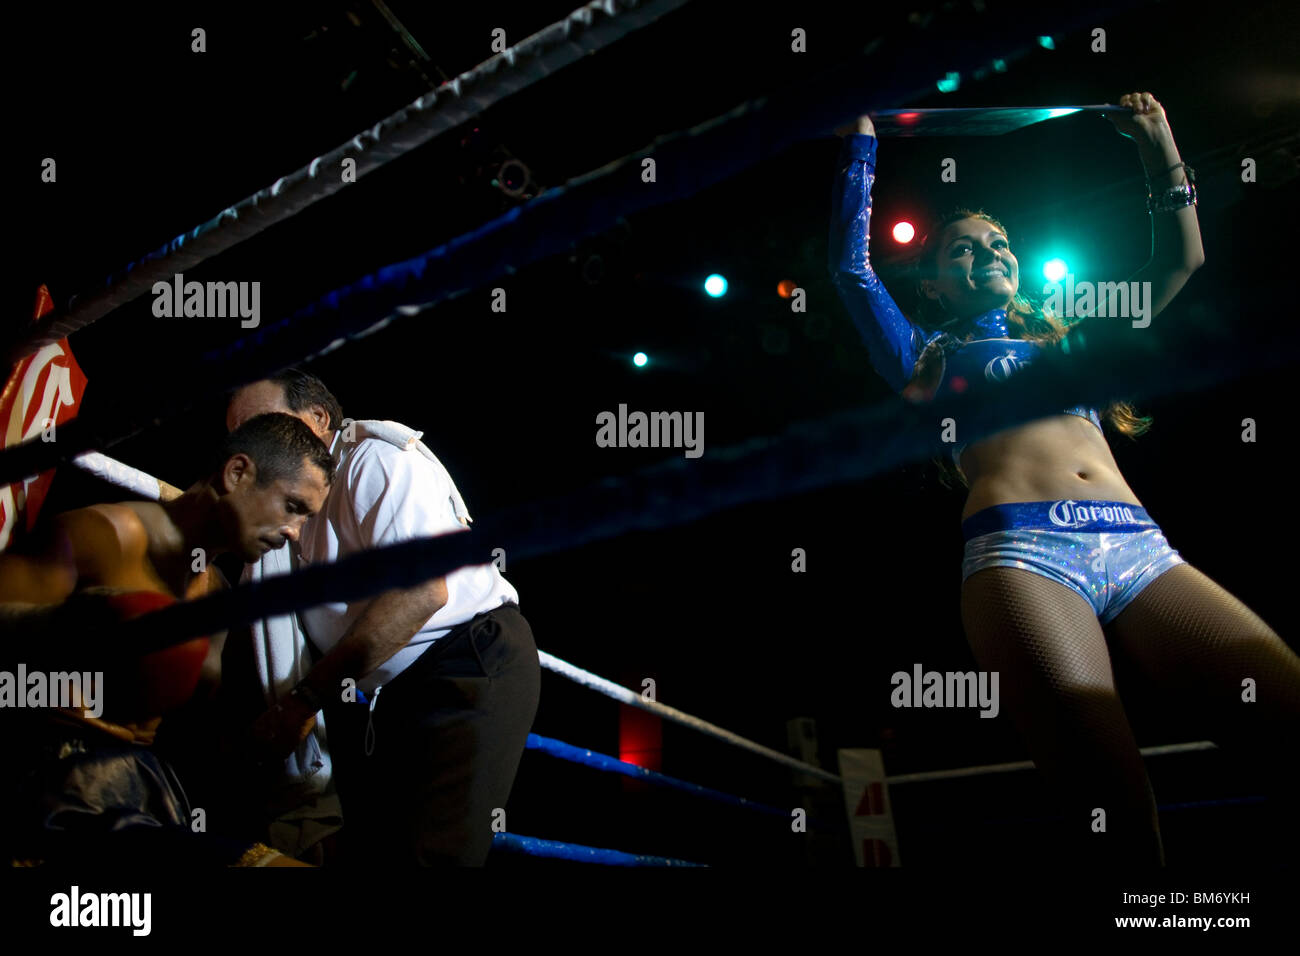 A boxer is attended by his trainer in his ring corner as a woman displays the round change sign during a bout in Mexico City. Stock Photo